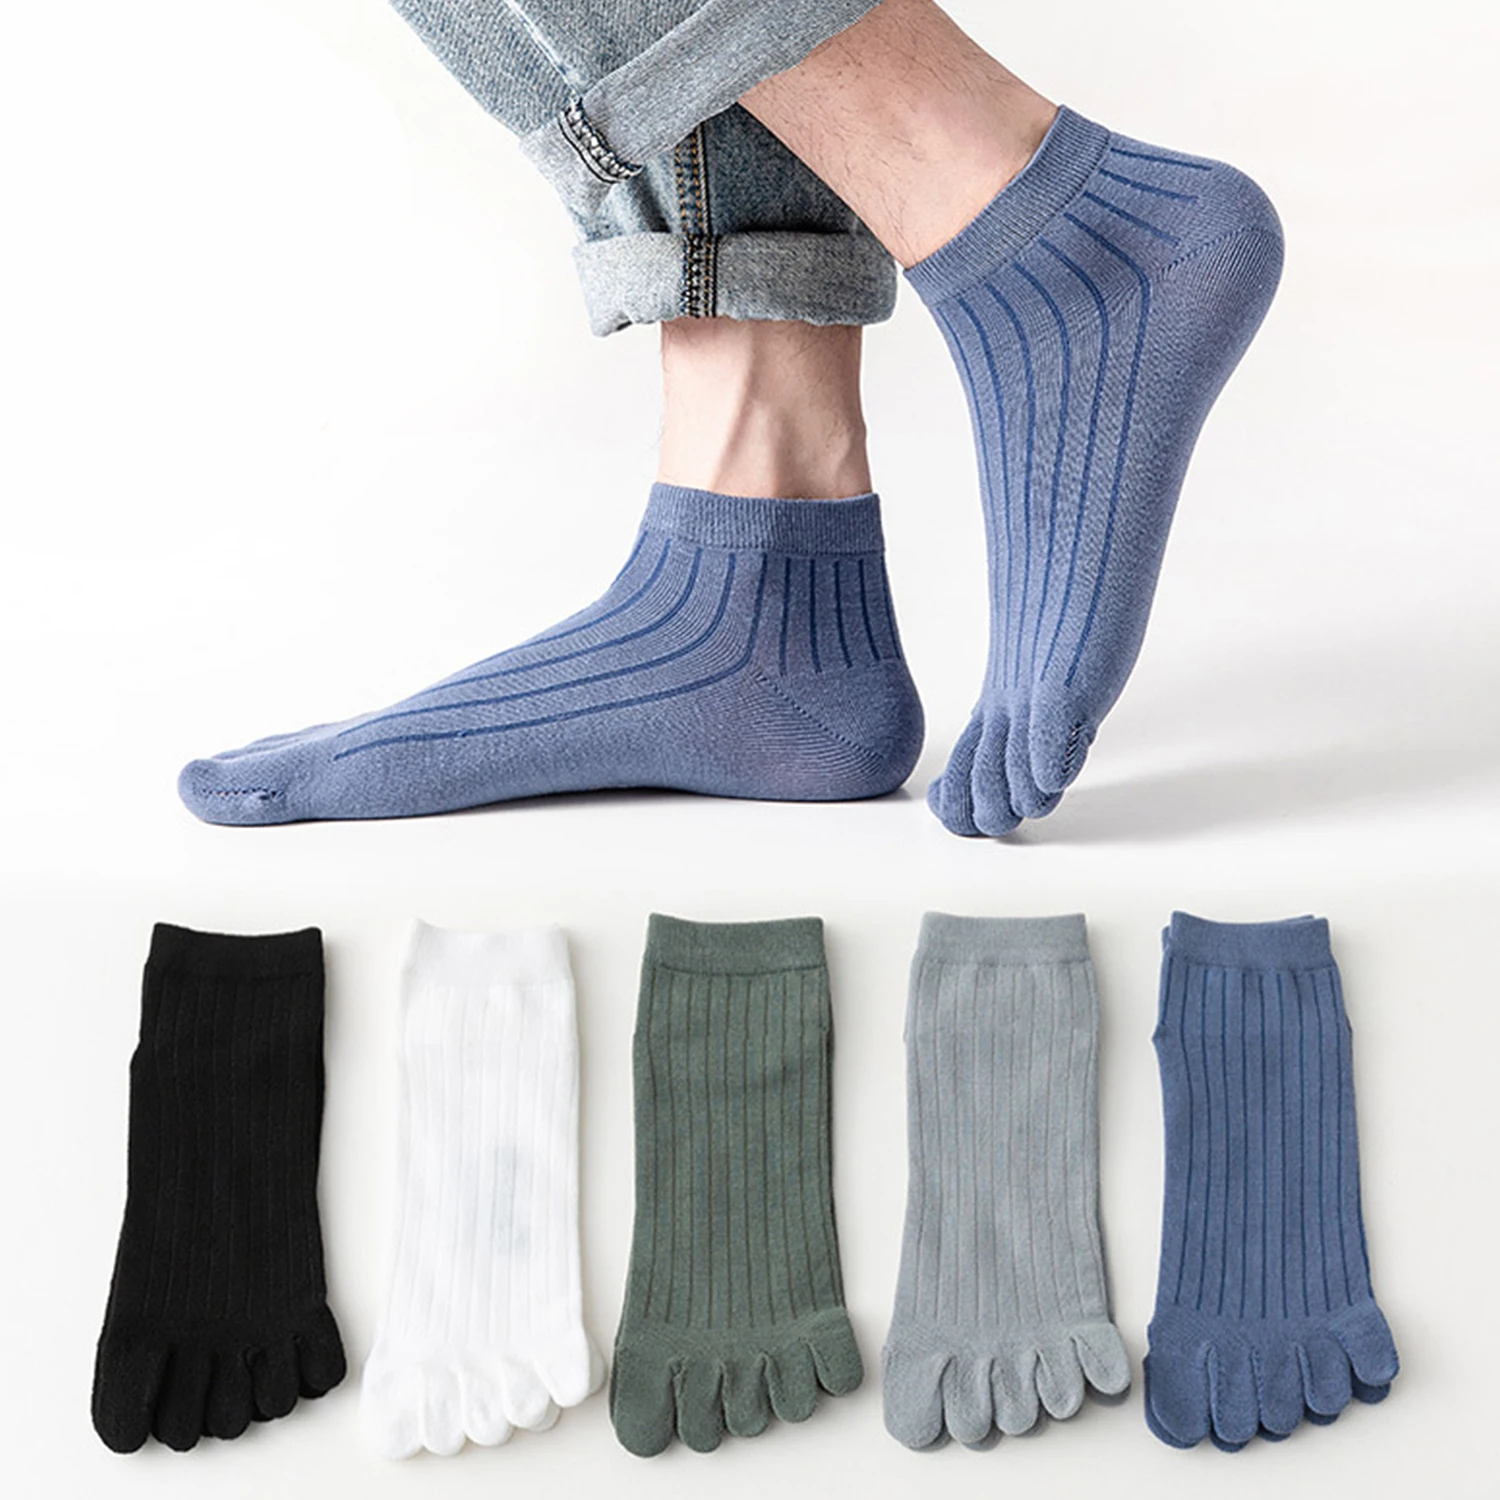 

Solid Color Cotton Five Finger Socks Mens Sports Breathable Soft Elastic Comfortable Shaping Anti Friction Men's Socks With Toes